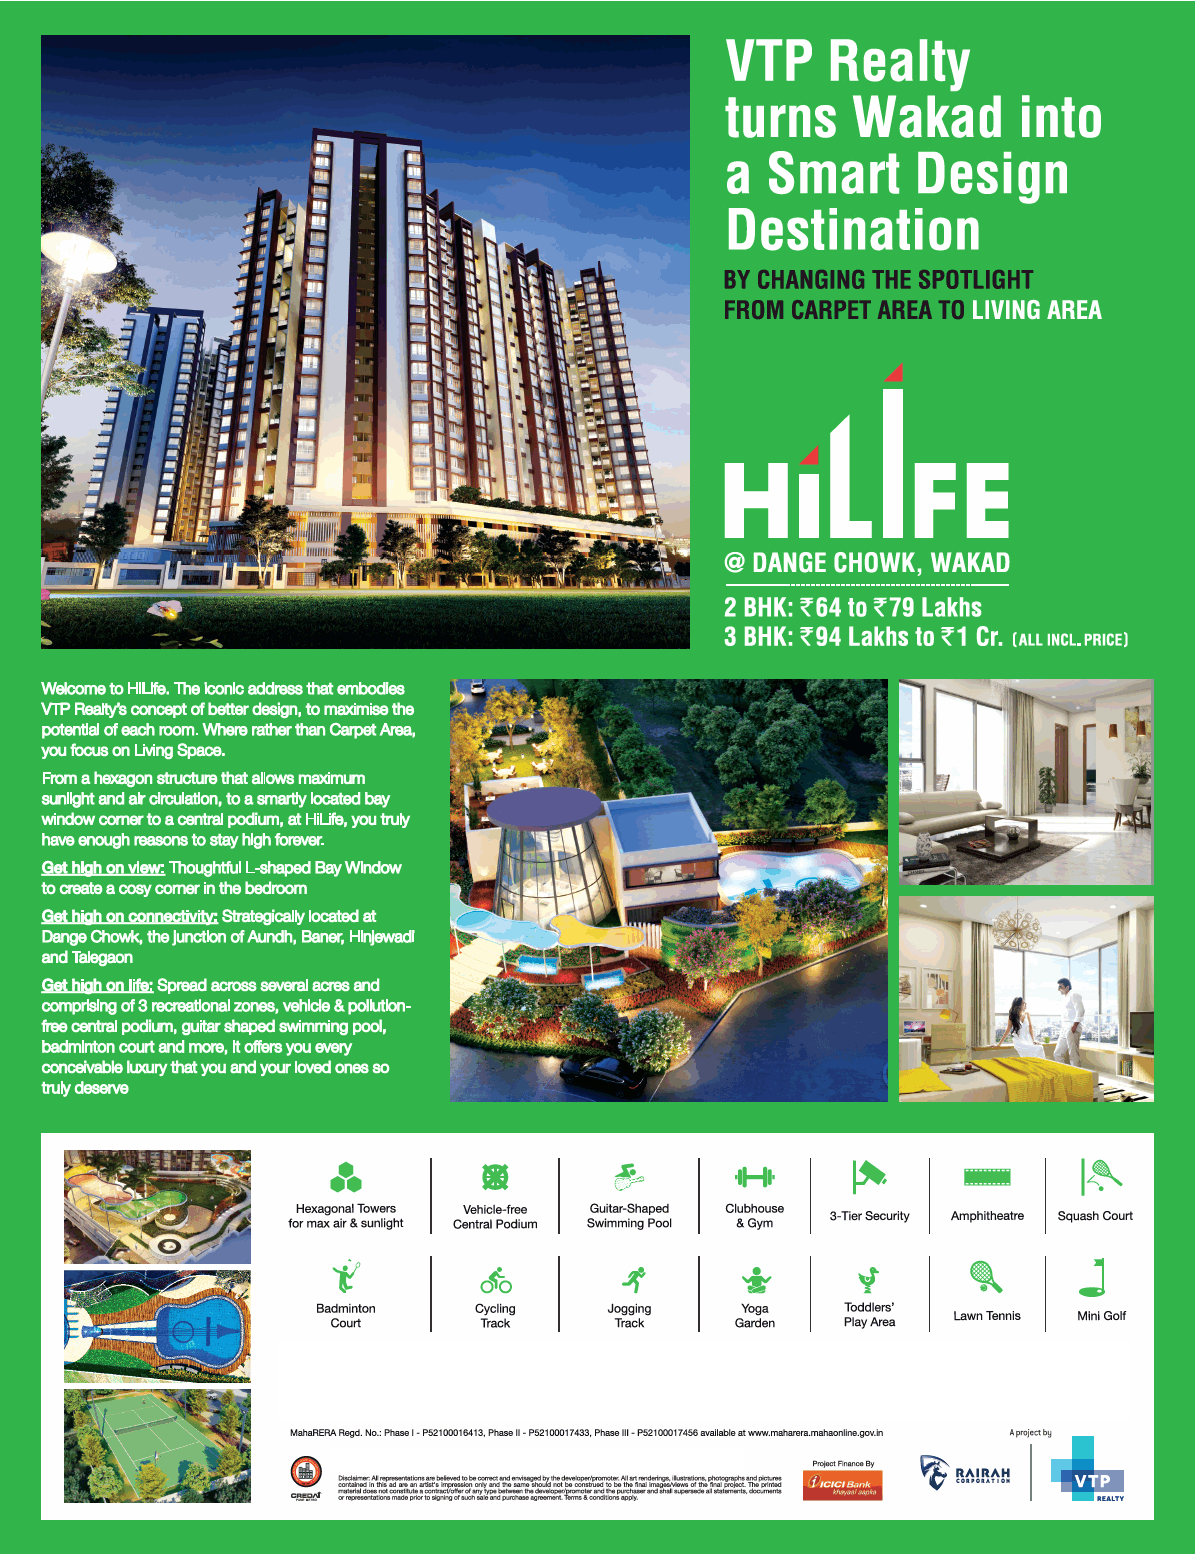 Book 2 & bhk with world class amenities at VTP Realty HiLife in Pune Update